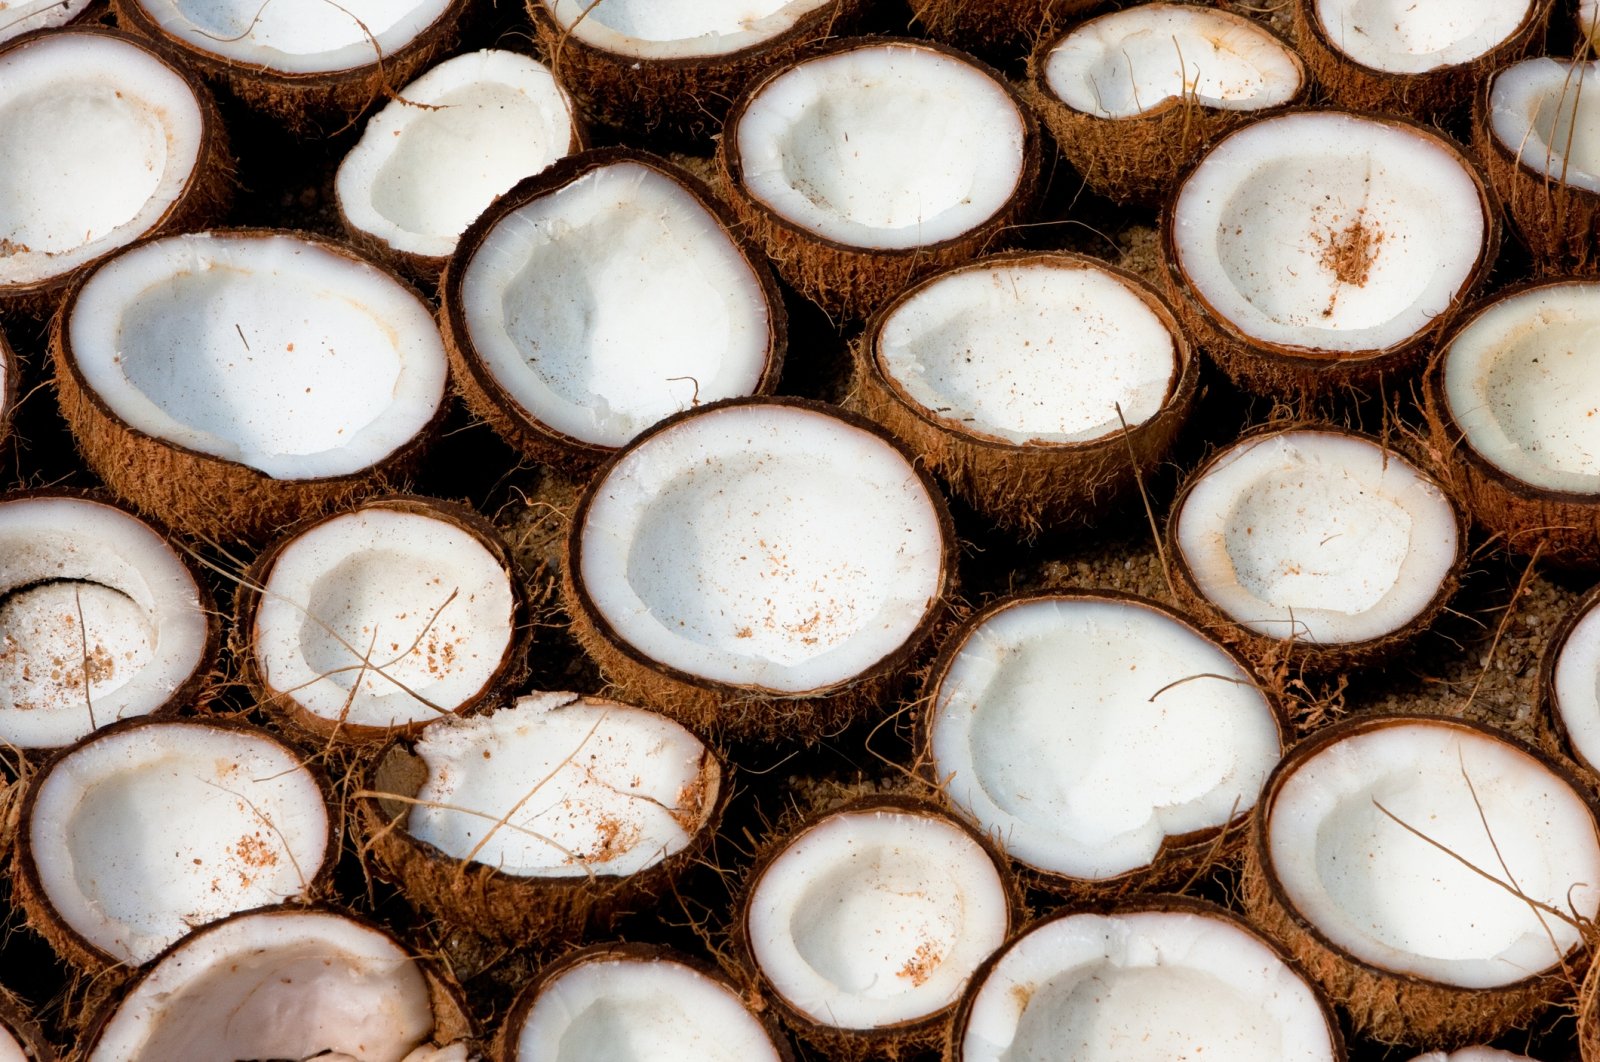 Preliminary results of the study have shown that virgin coconut oil helps destroy the coronavirus. (iStock Photo)